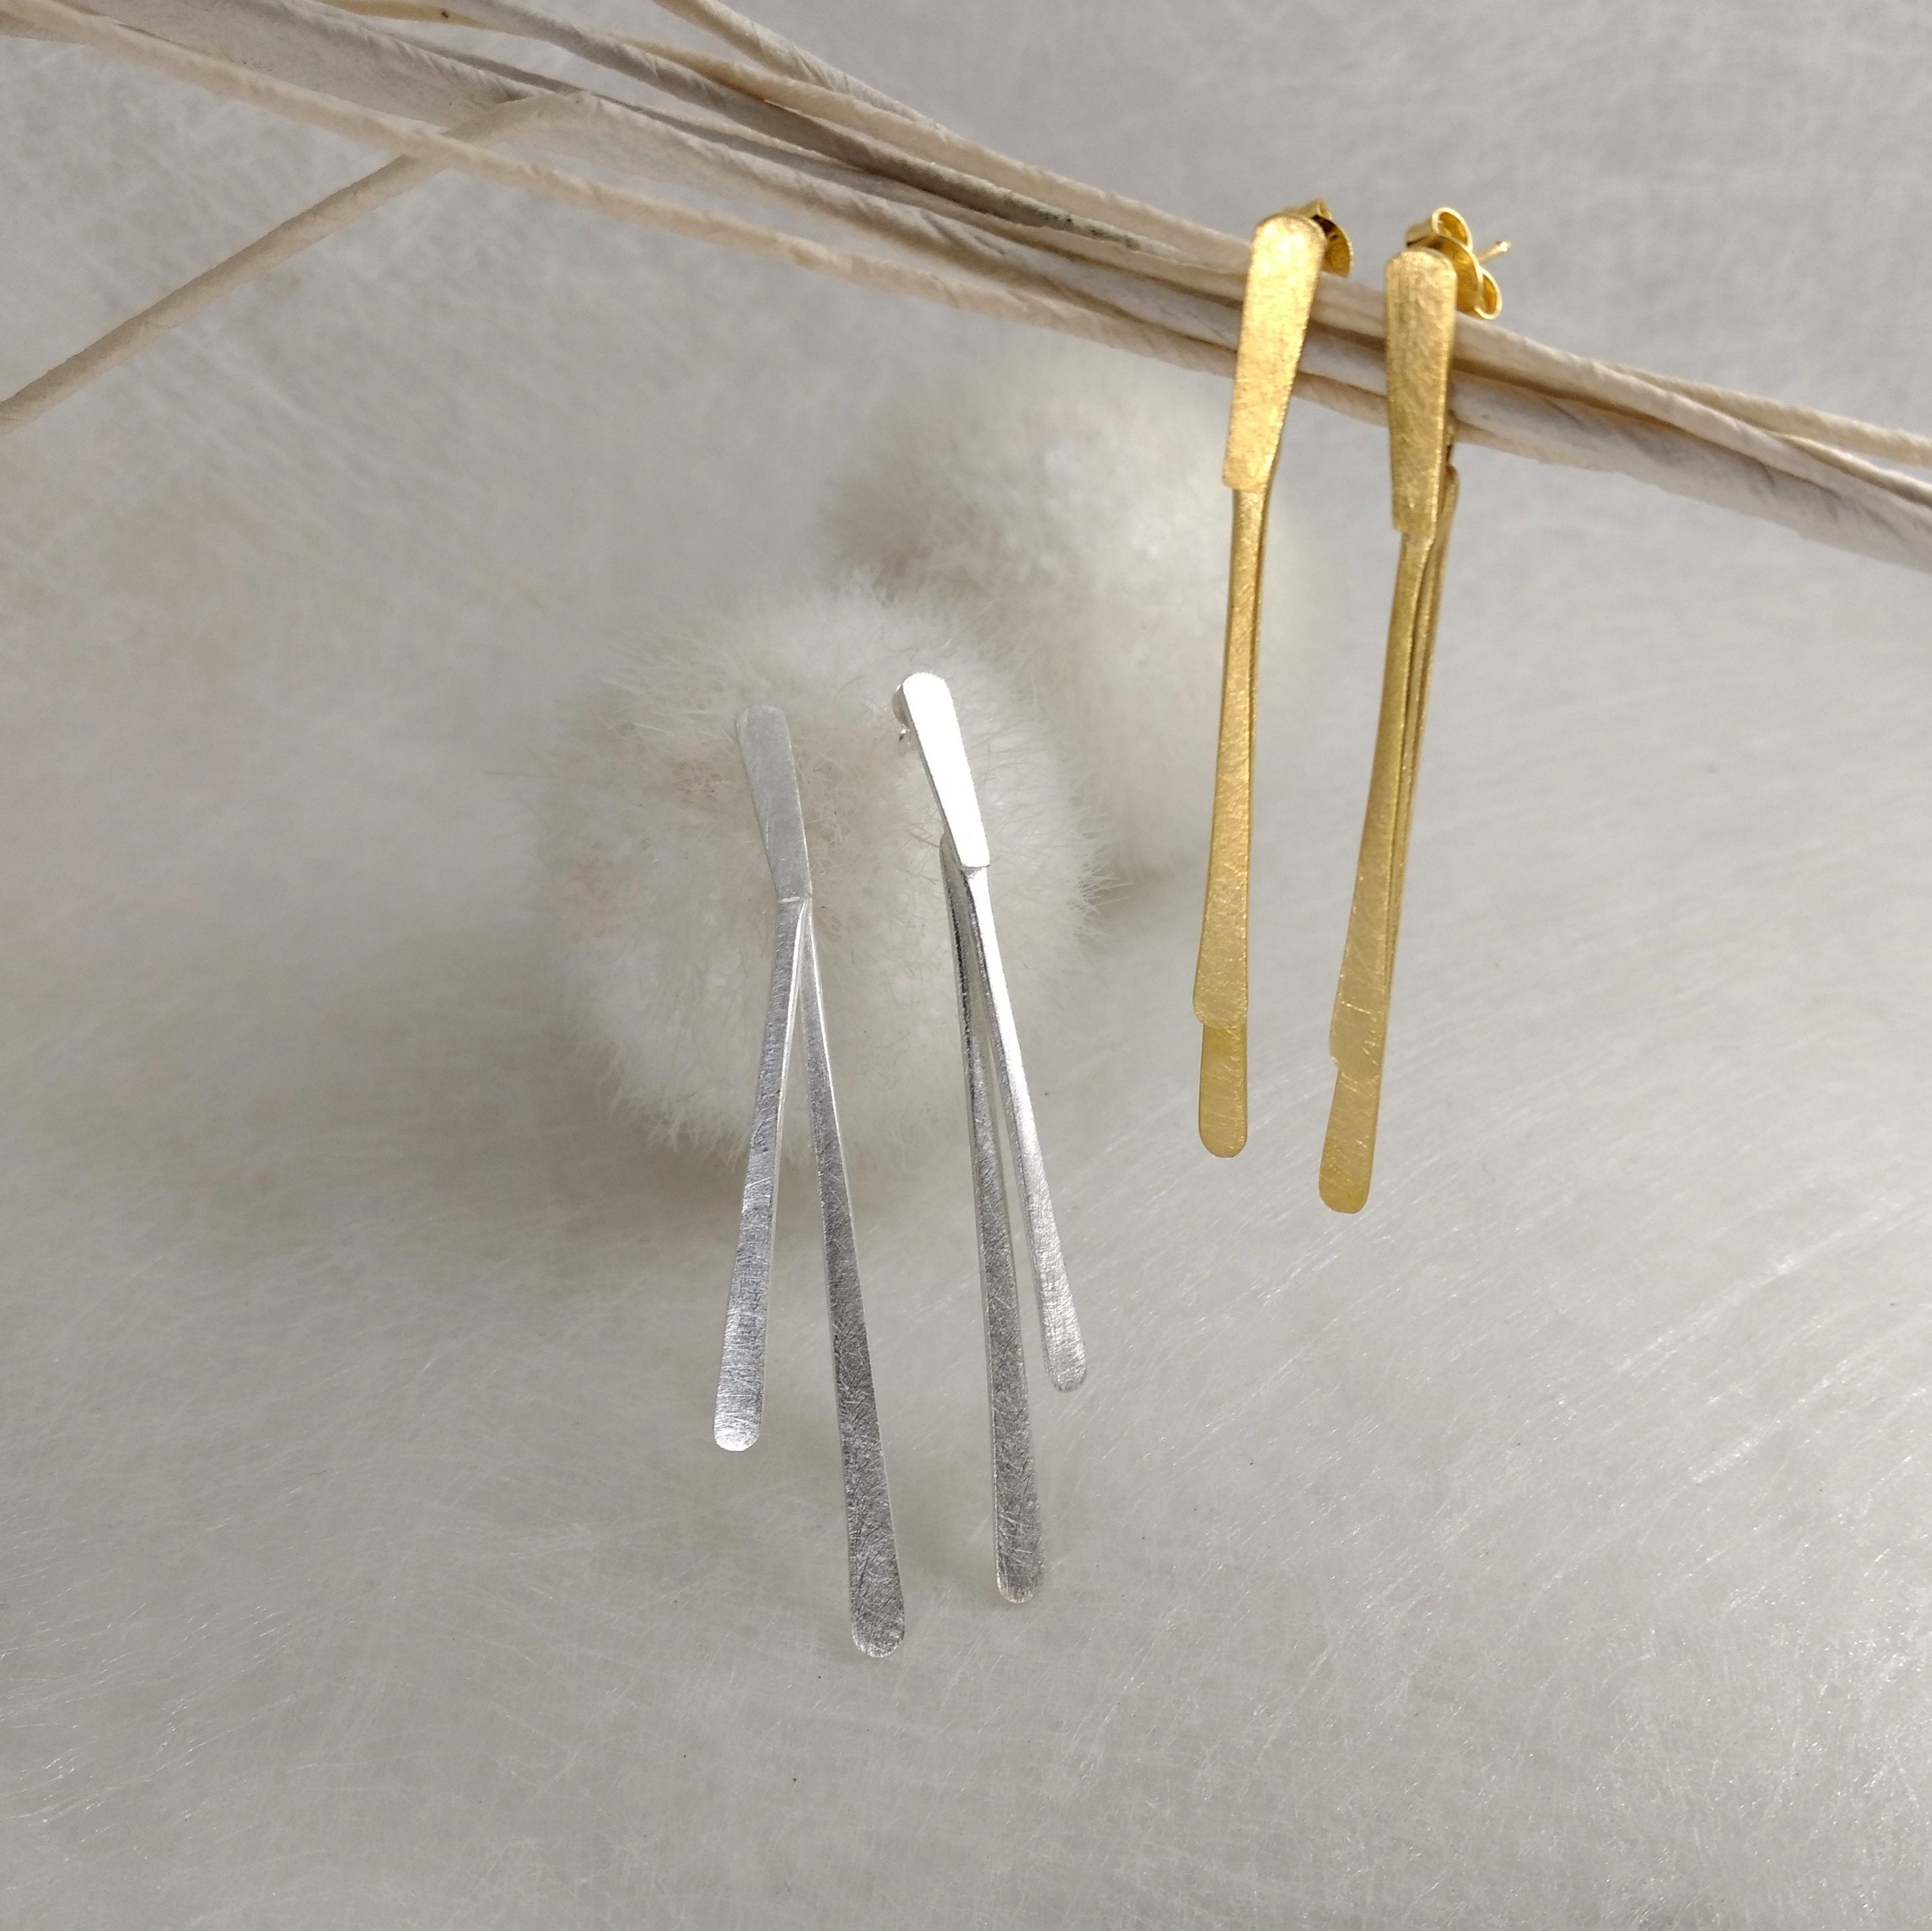 UbaL - Elegant and long earrings in silver or gold plated silver (7cm long)